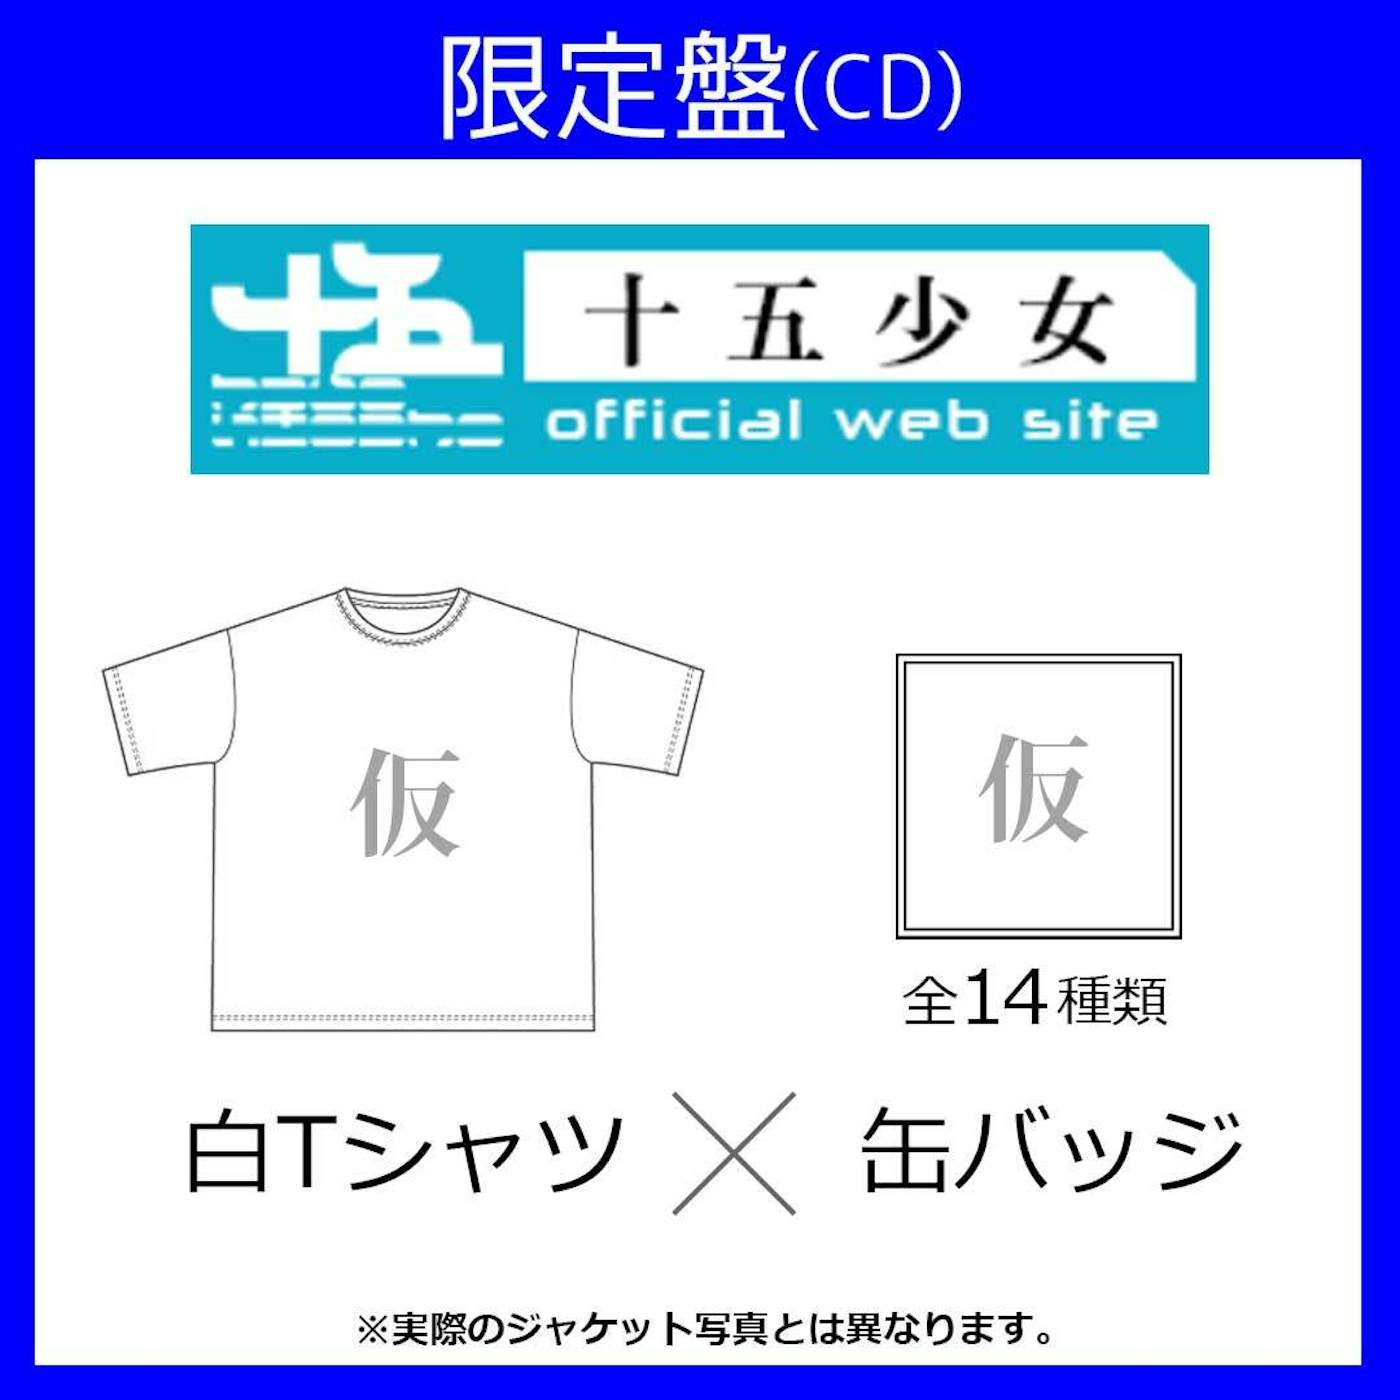 Fifteen voices ≪限定セット：缶バッジ×白Tシャツ(M)≫SILENTHATED(2枚組AL+スマプラ)